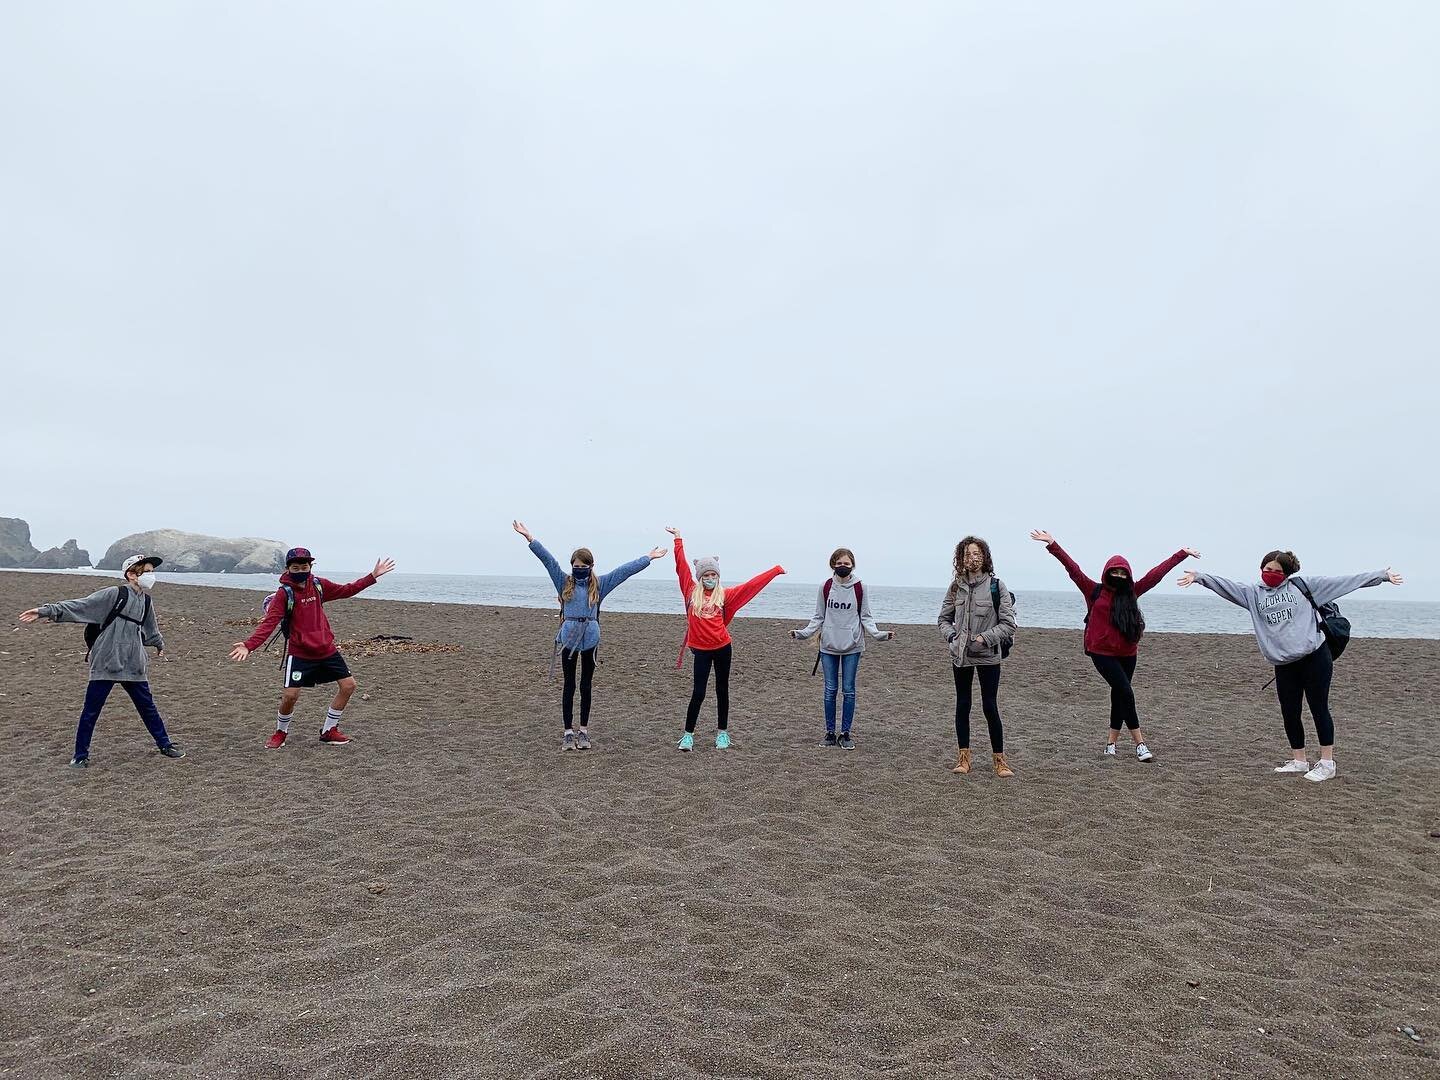 Day One of [Socially Distant] Excursion Week was a huge success! Forum groups convened all over the Bay Area in beautiful-- if a bit foggy-- outdoor locations to reconnect in person for the first time in months, and new sixth graders were together wi